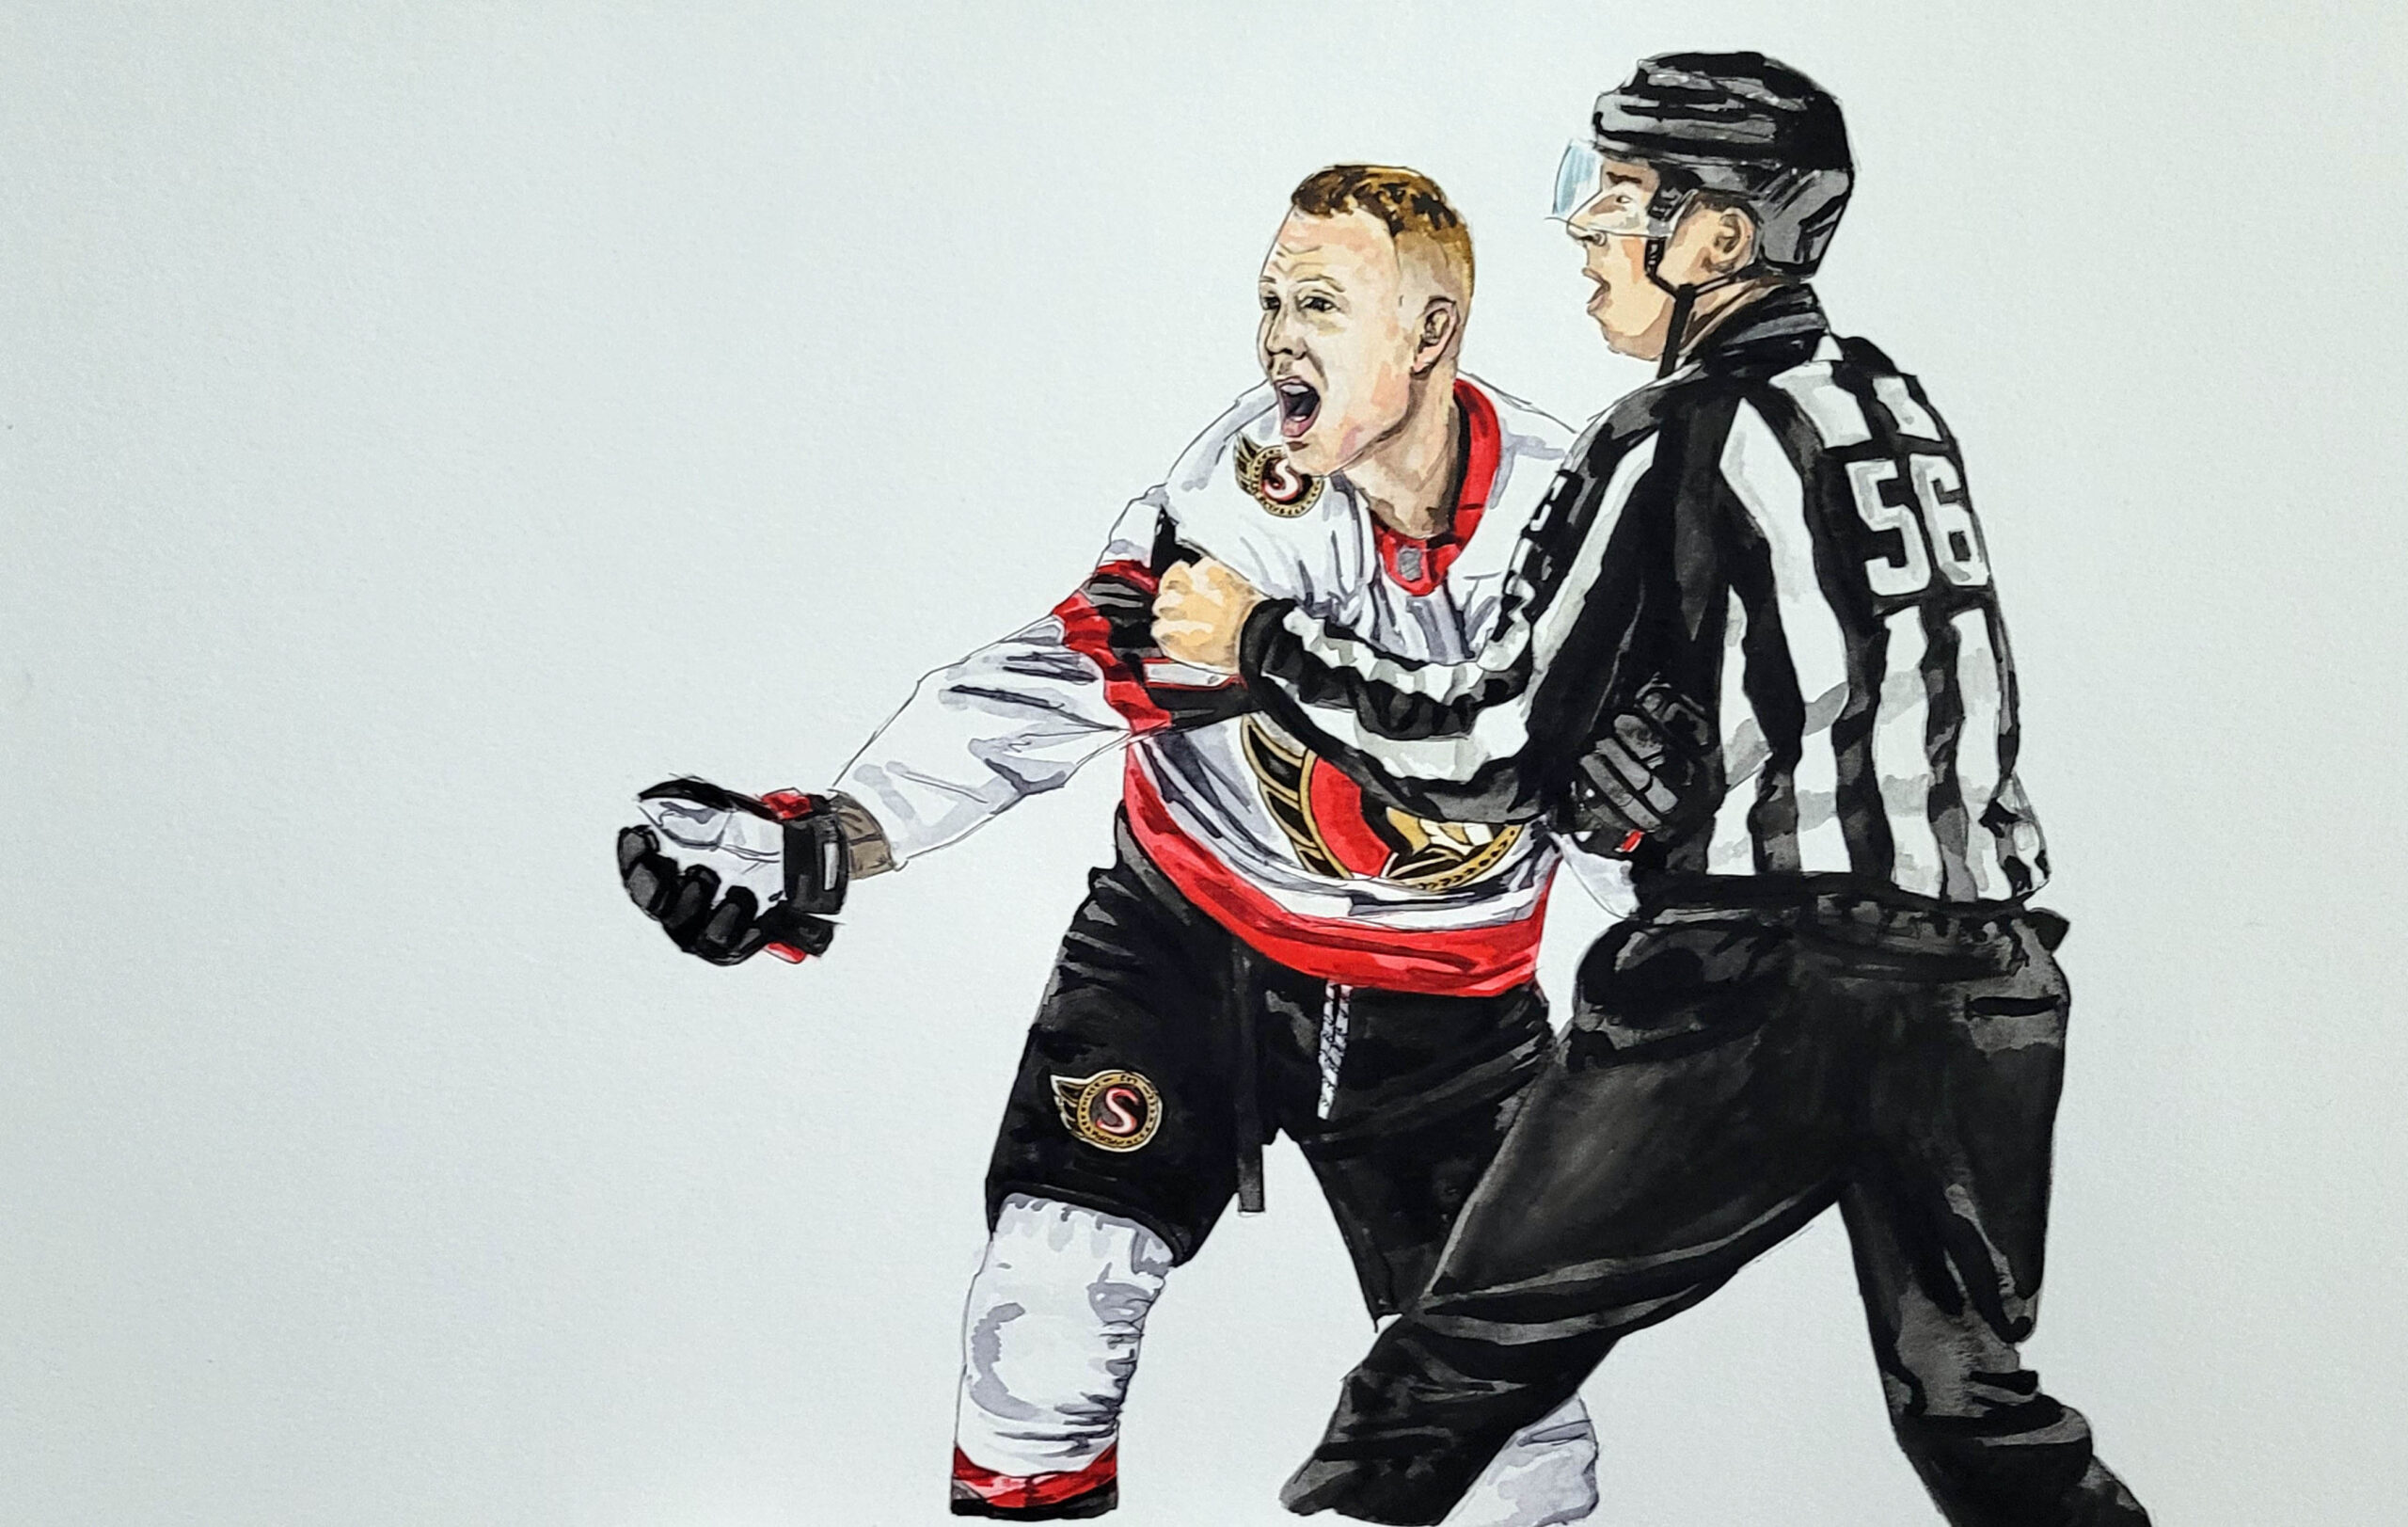 Watercolour painting of Brady Tkachuk being restrained by an official.